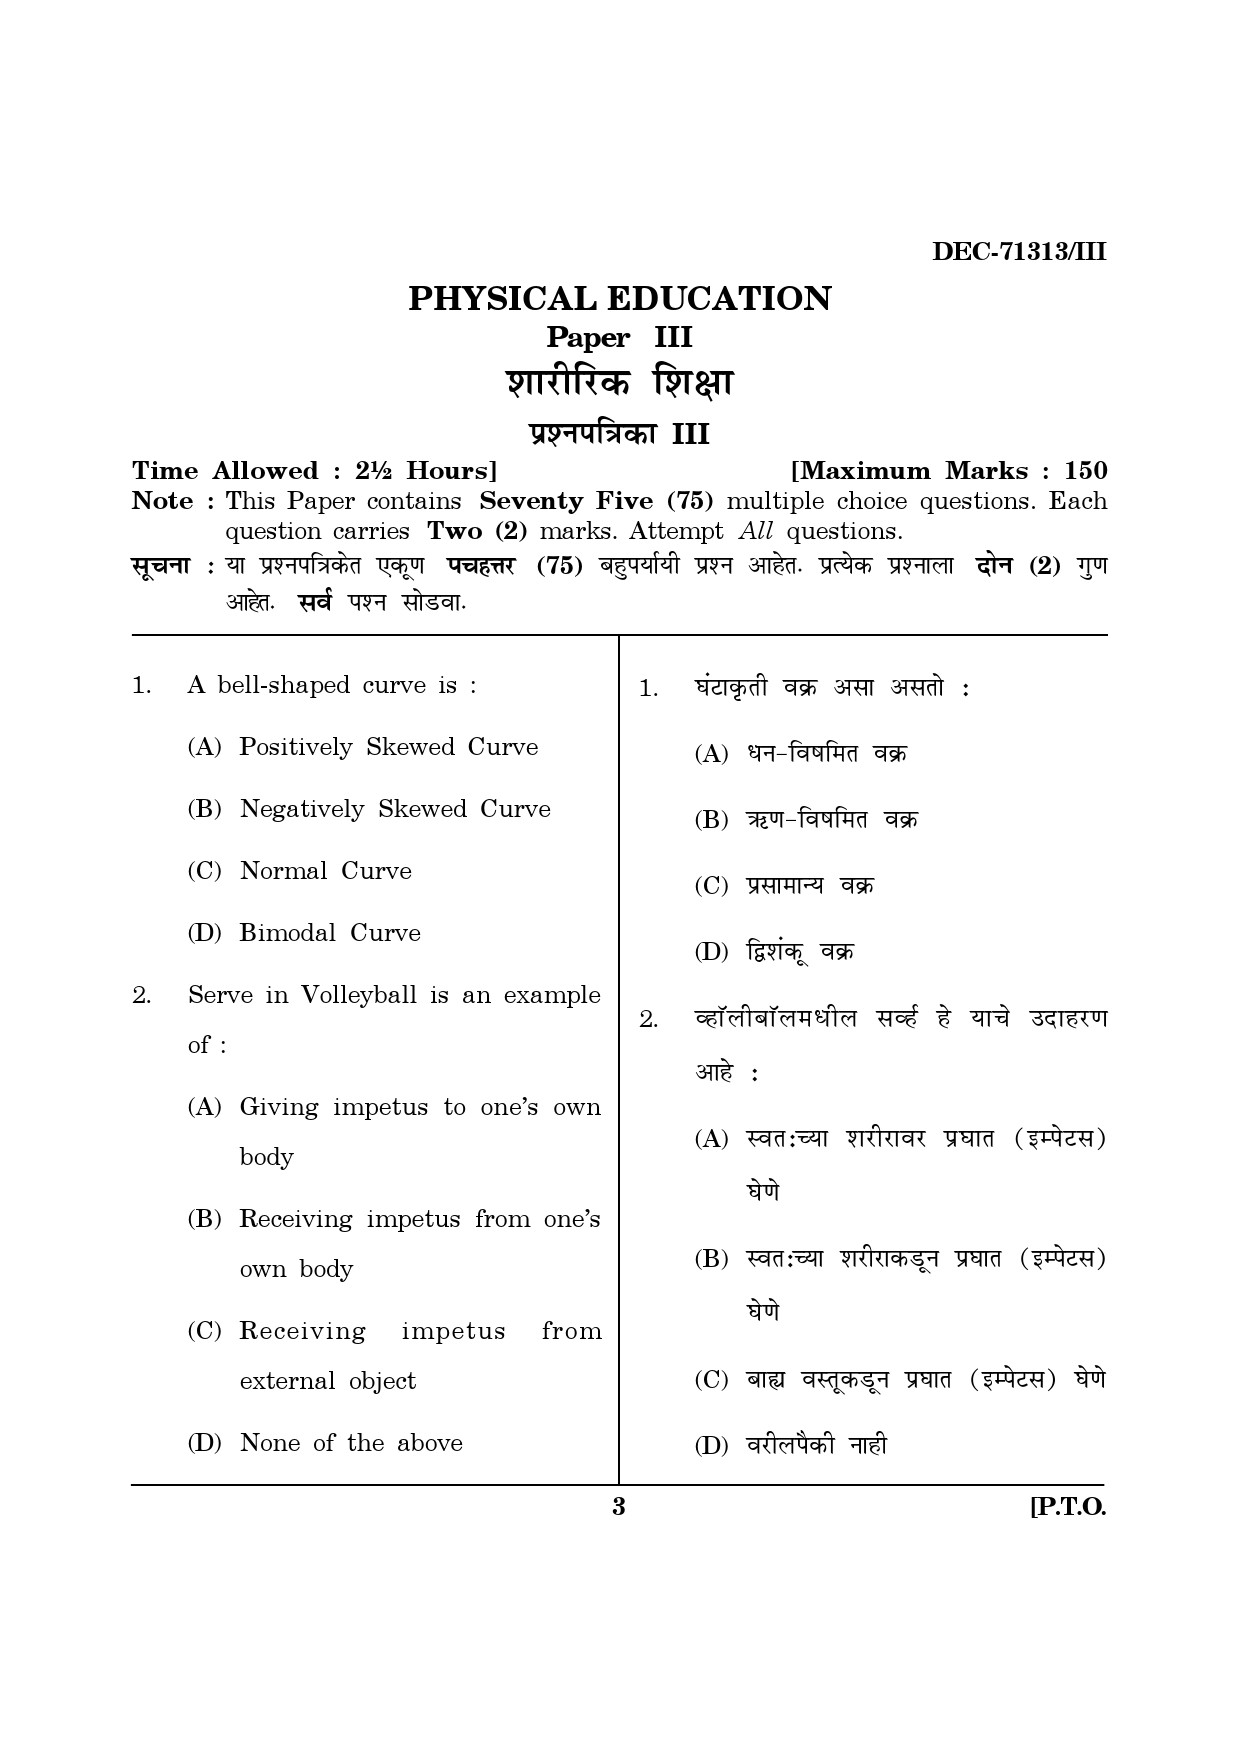 Maharashtra SET Physical Education Question Paper III December 2013 2